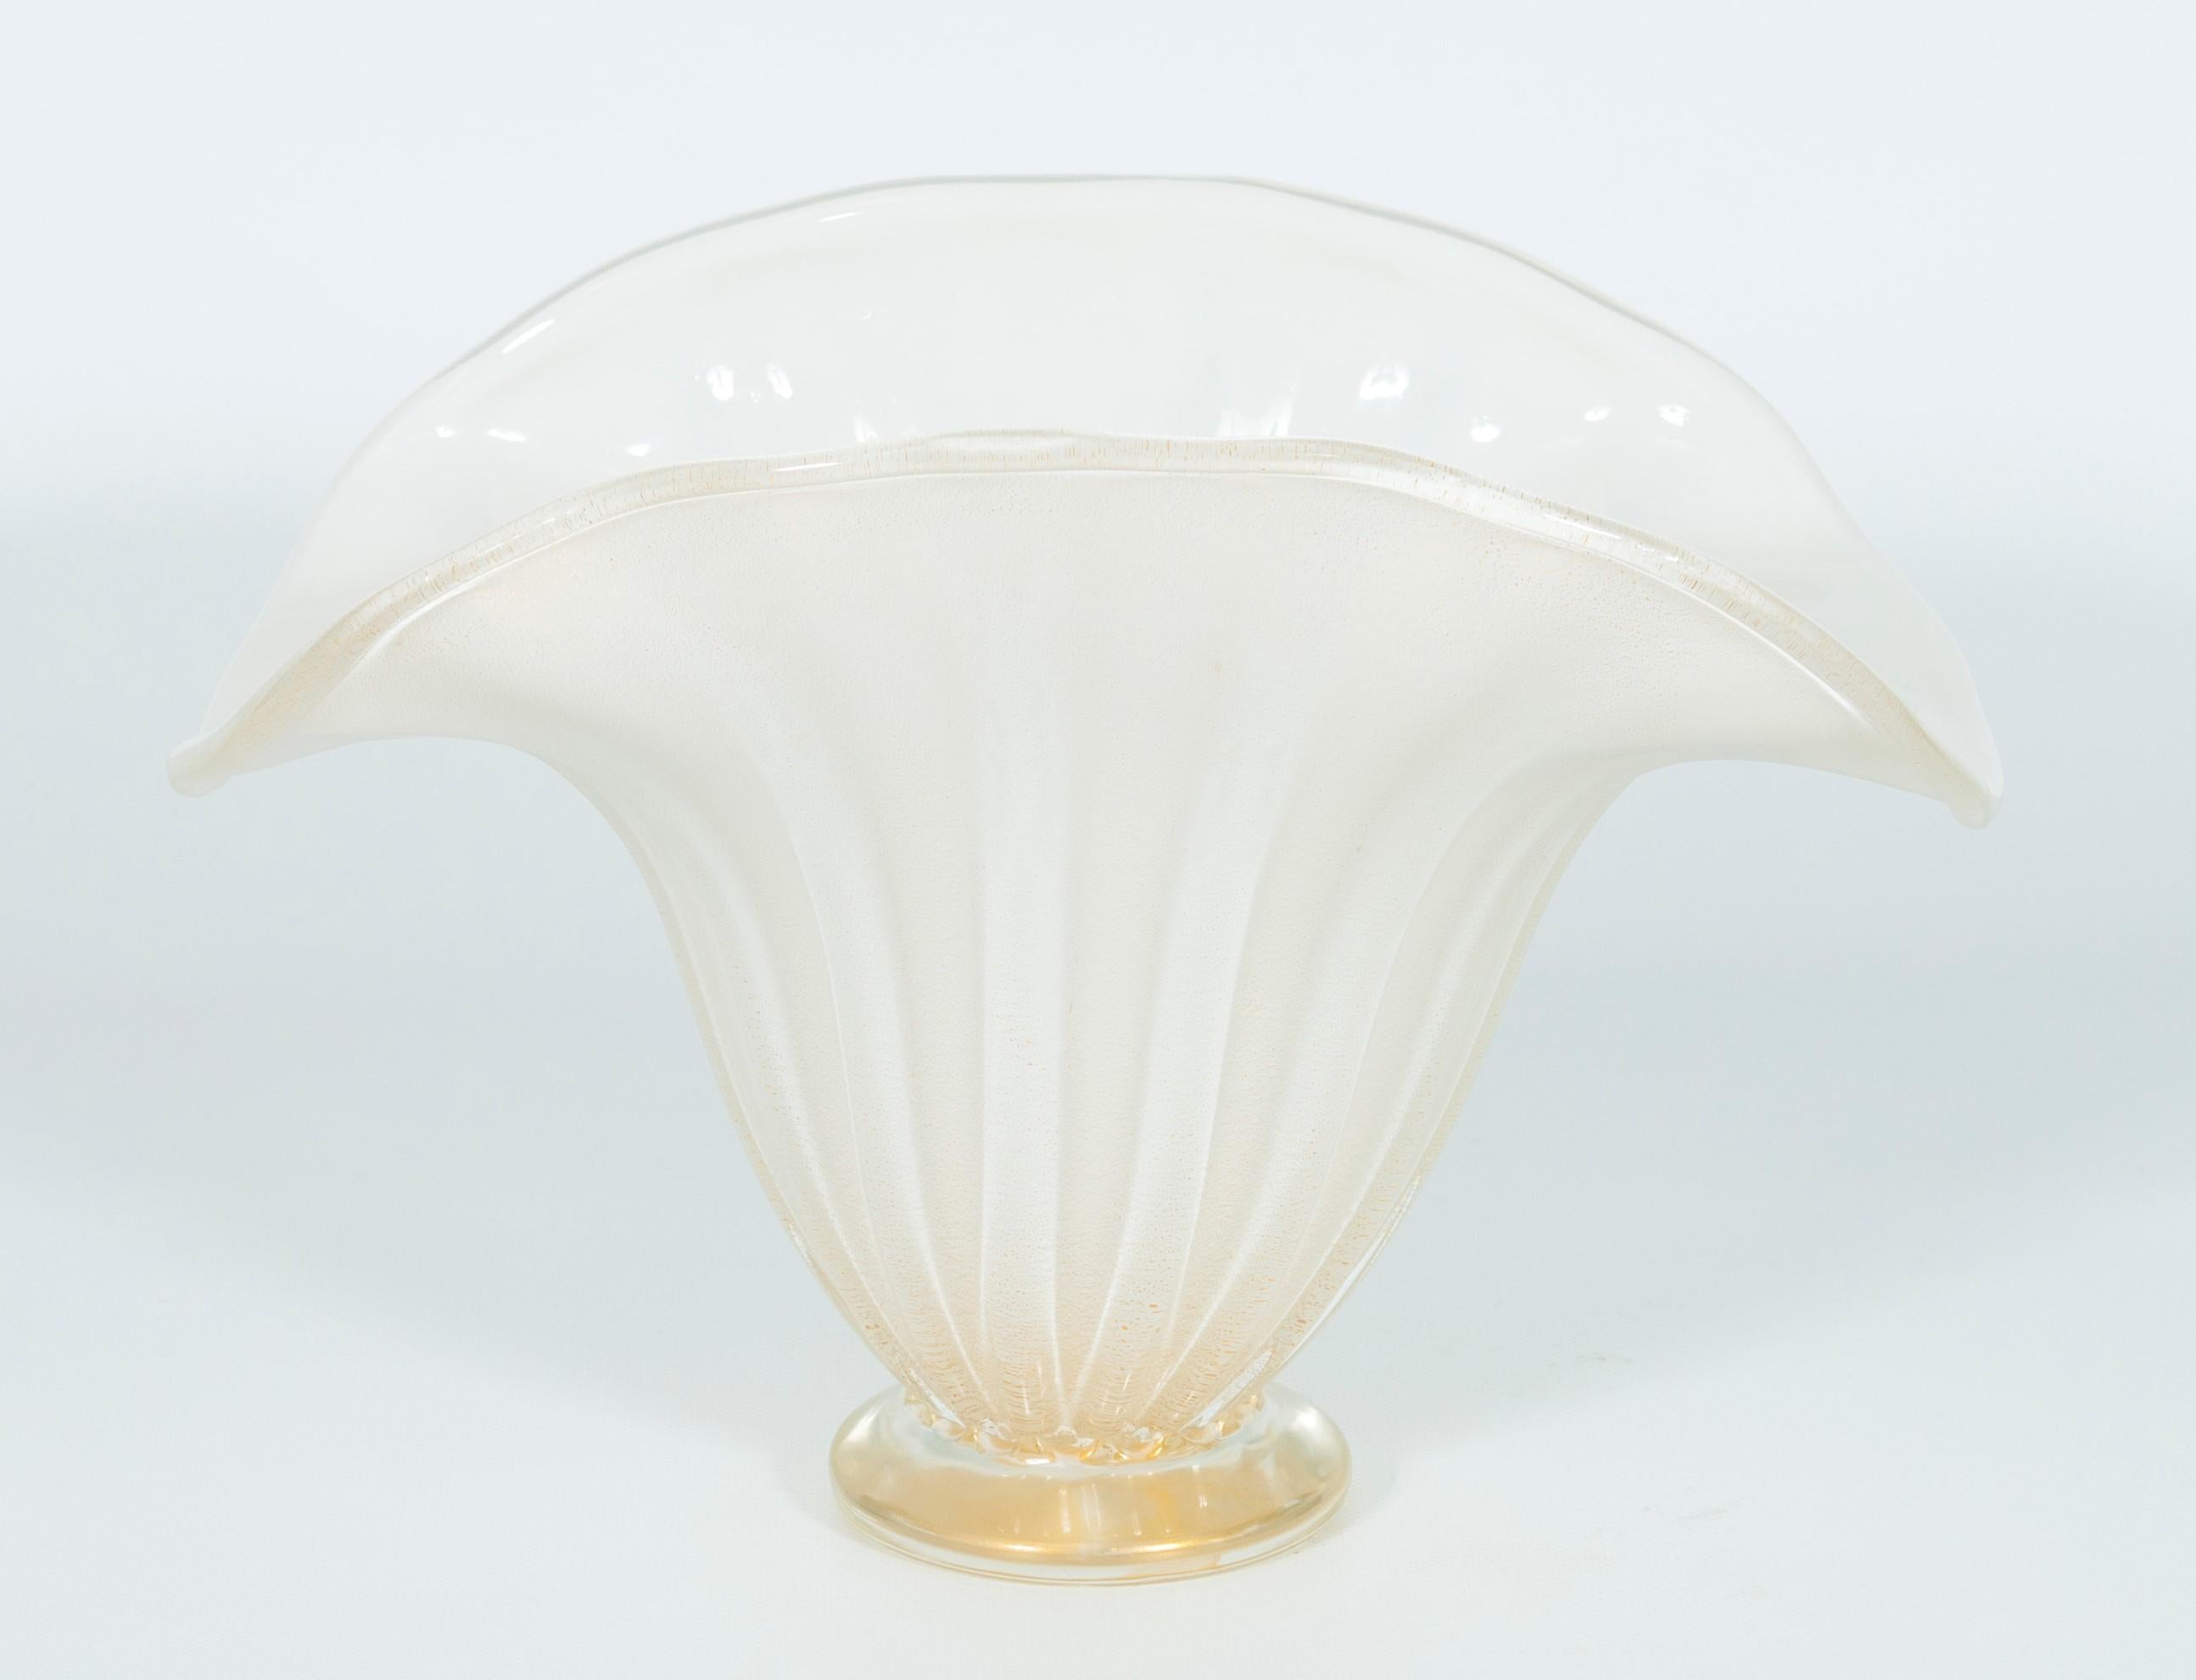 Artistic Fan-Shaped Murano Glass Bowl Sculpture with Sunken Gold, 1980s Italy.
This is a rare and authentic Venetian work of art, entirely handcrafted in the island of Murano in the 1980s. The sculpture takes the shape of a fan (